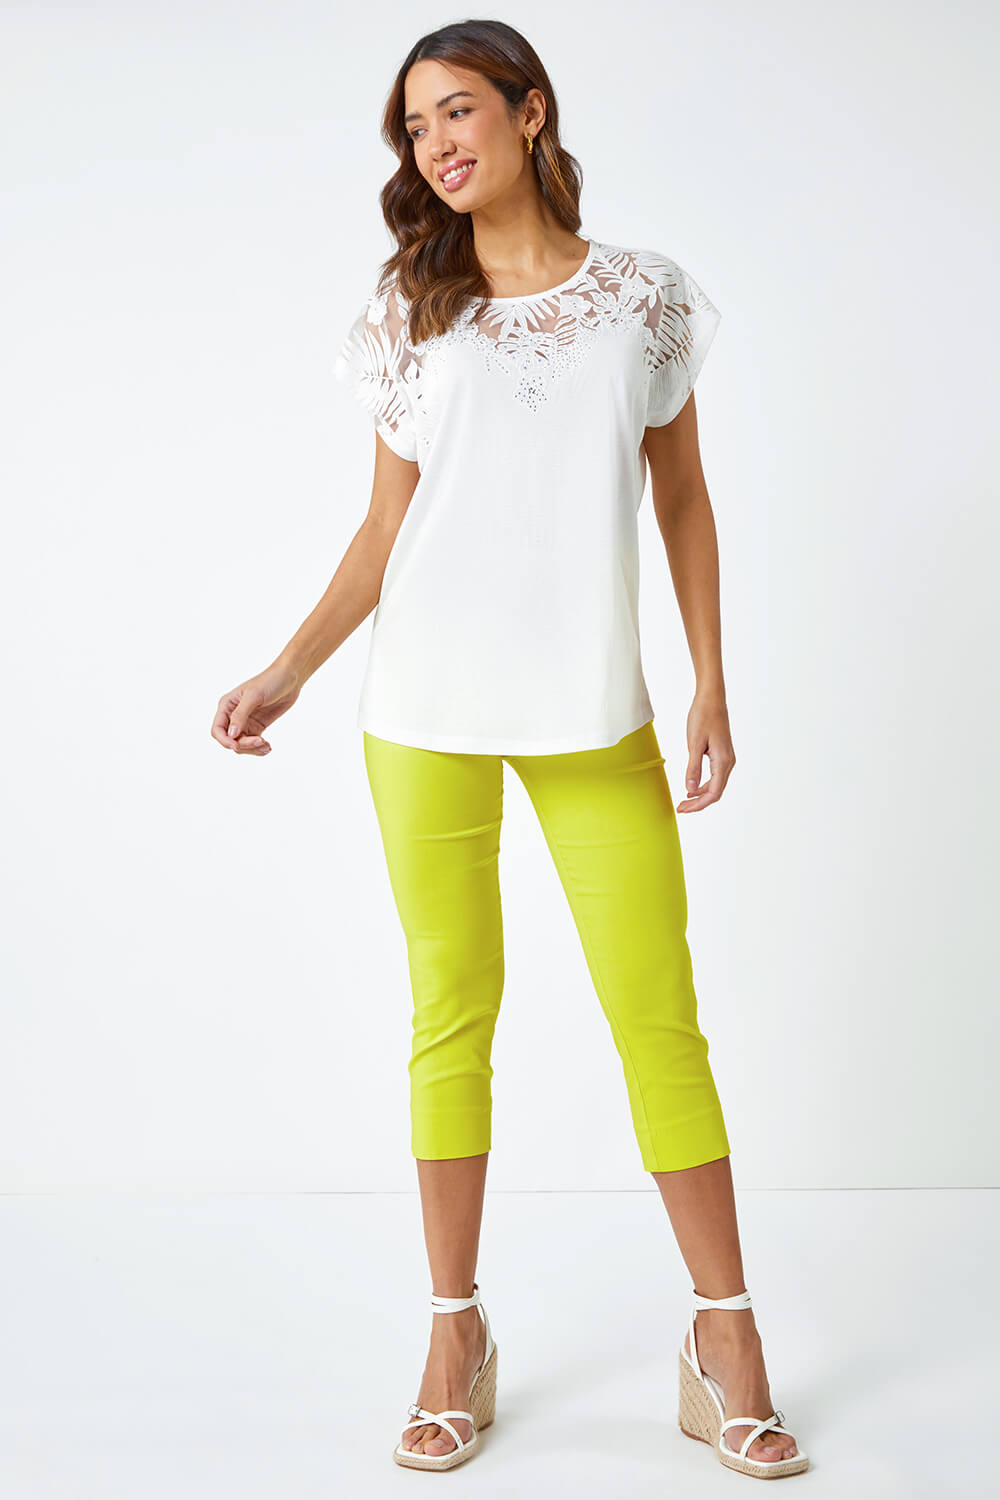 Ivory  Sparkle Palm Print Cut Out T-Shirt, Image 5 of 6